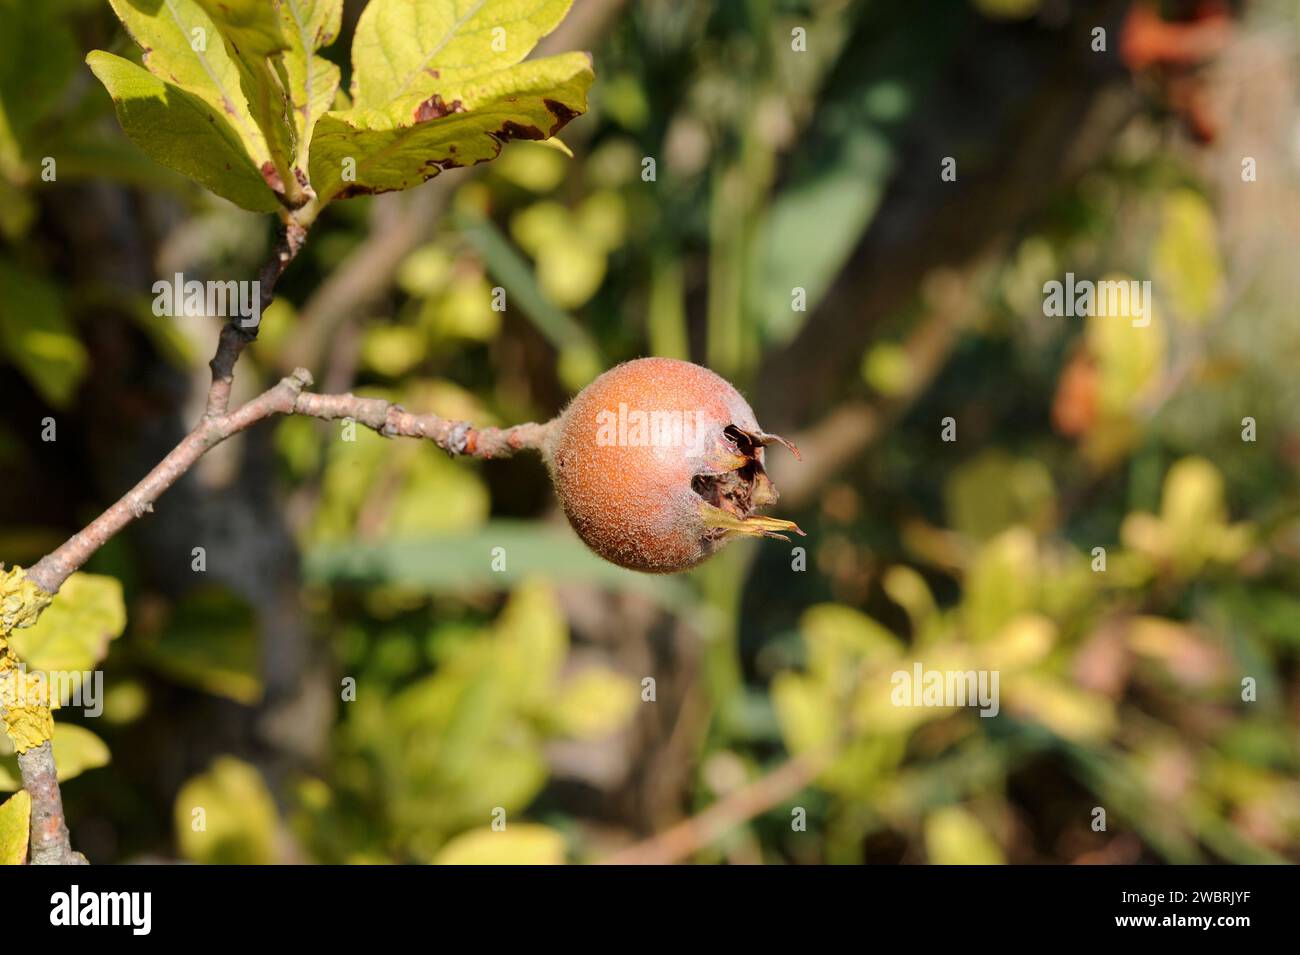 Common medlar (Mespilus germanica) is a shrub or small tree native to Asia and southeastern Europe. Its fruits (pomes) are edible. Stock Photo